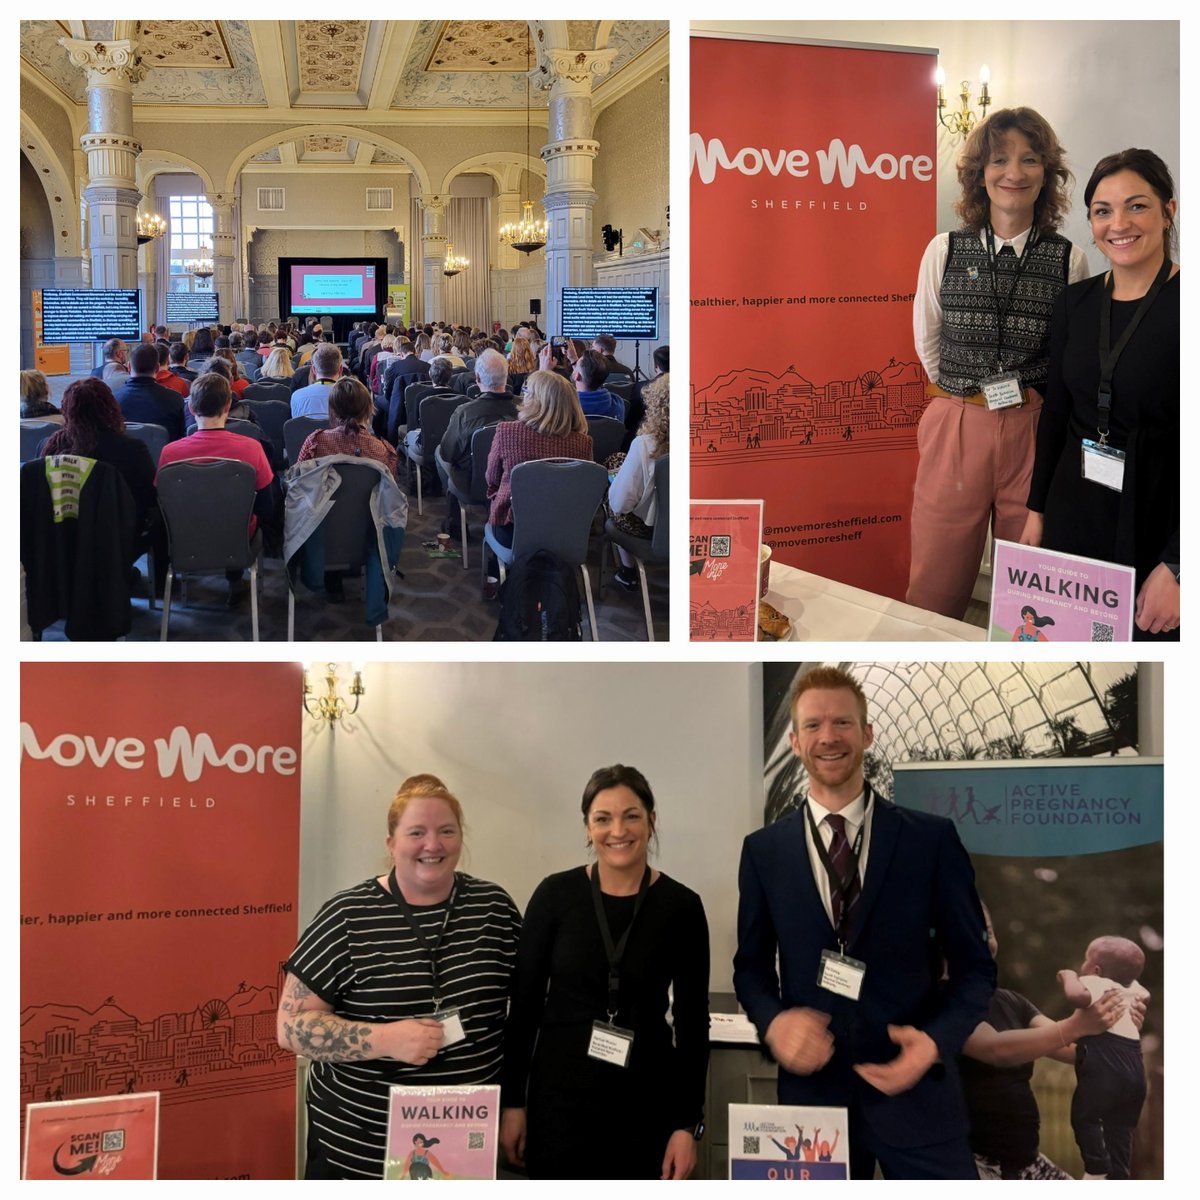 Today was an excellent day at Sheffield #WalkingSummit So much to discuss/learn/share Thank you @livingstreets and Crowne Plaza Royal Victoria #movemoresheffield #sheffieldissuper #activepregnancyfoundation